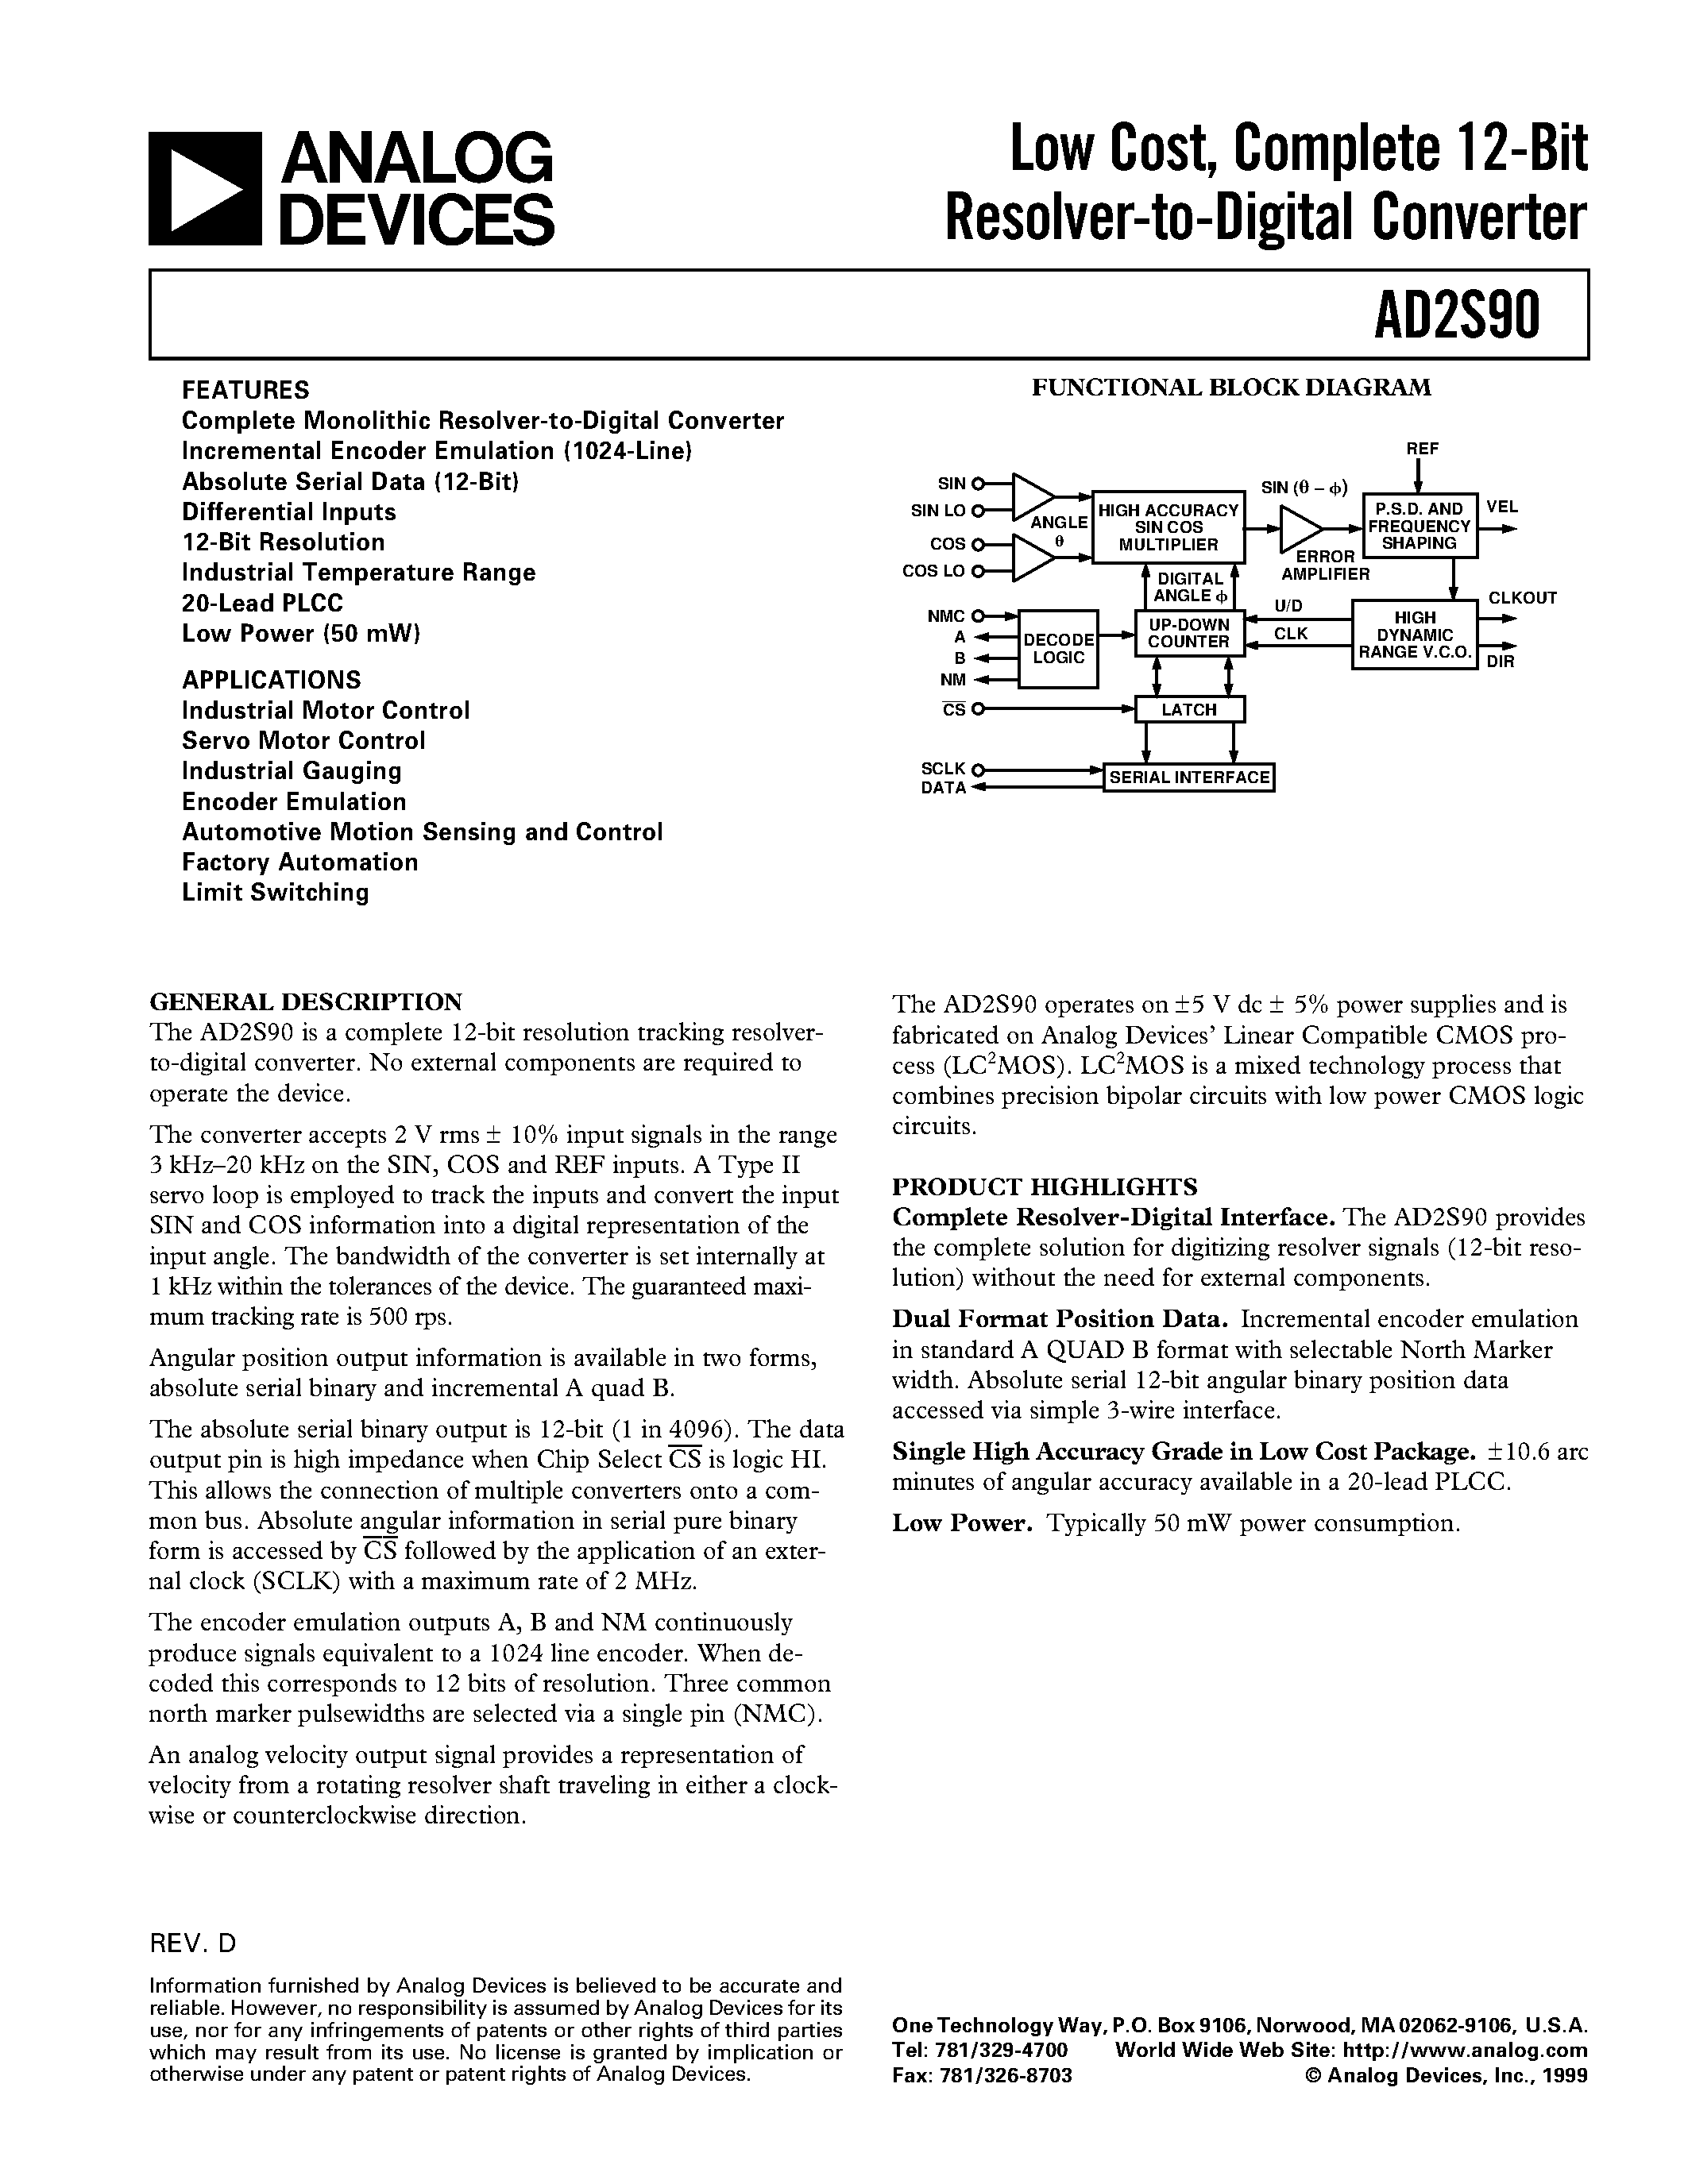 Datasheet AD2S90 - Low Cost/ Complete 12-Bit Resolver-to-Digital Converter page 1